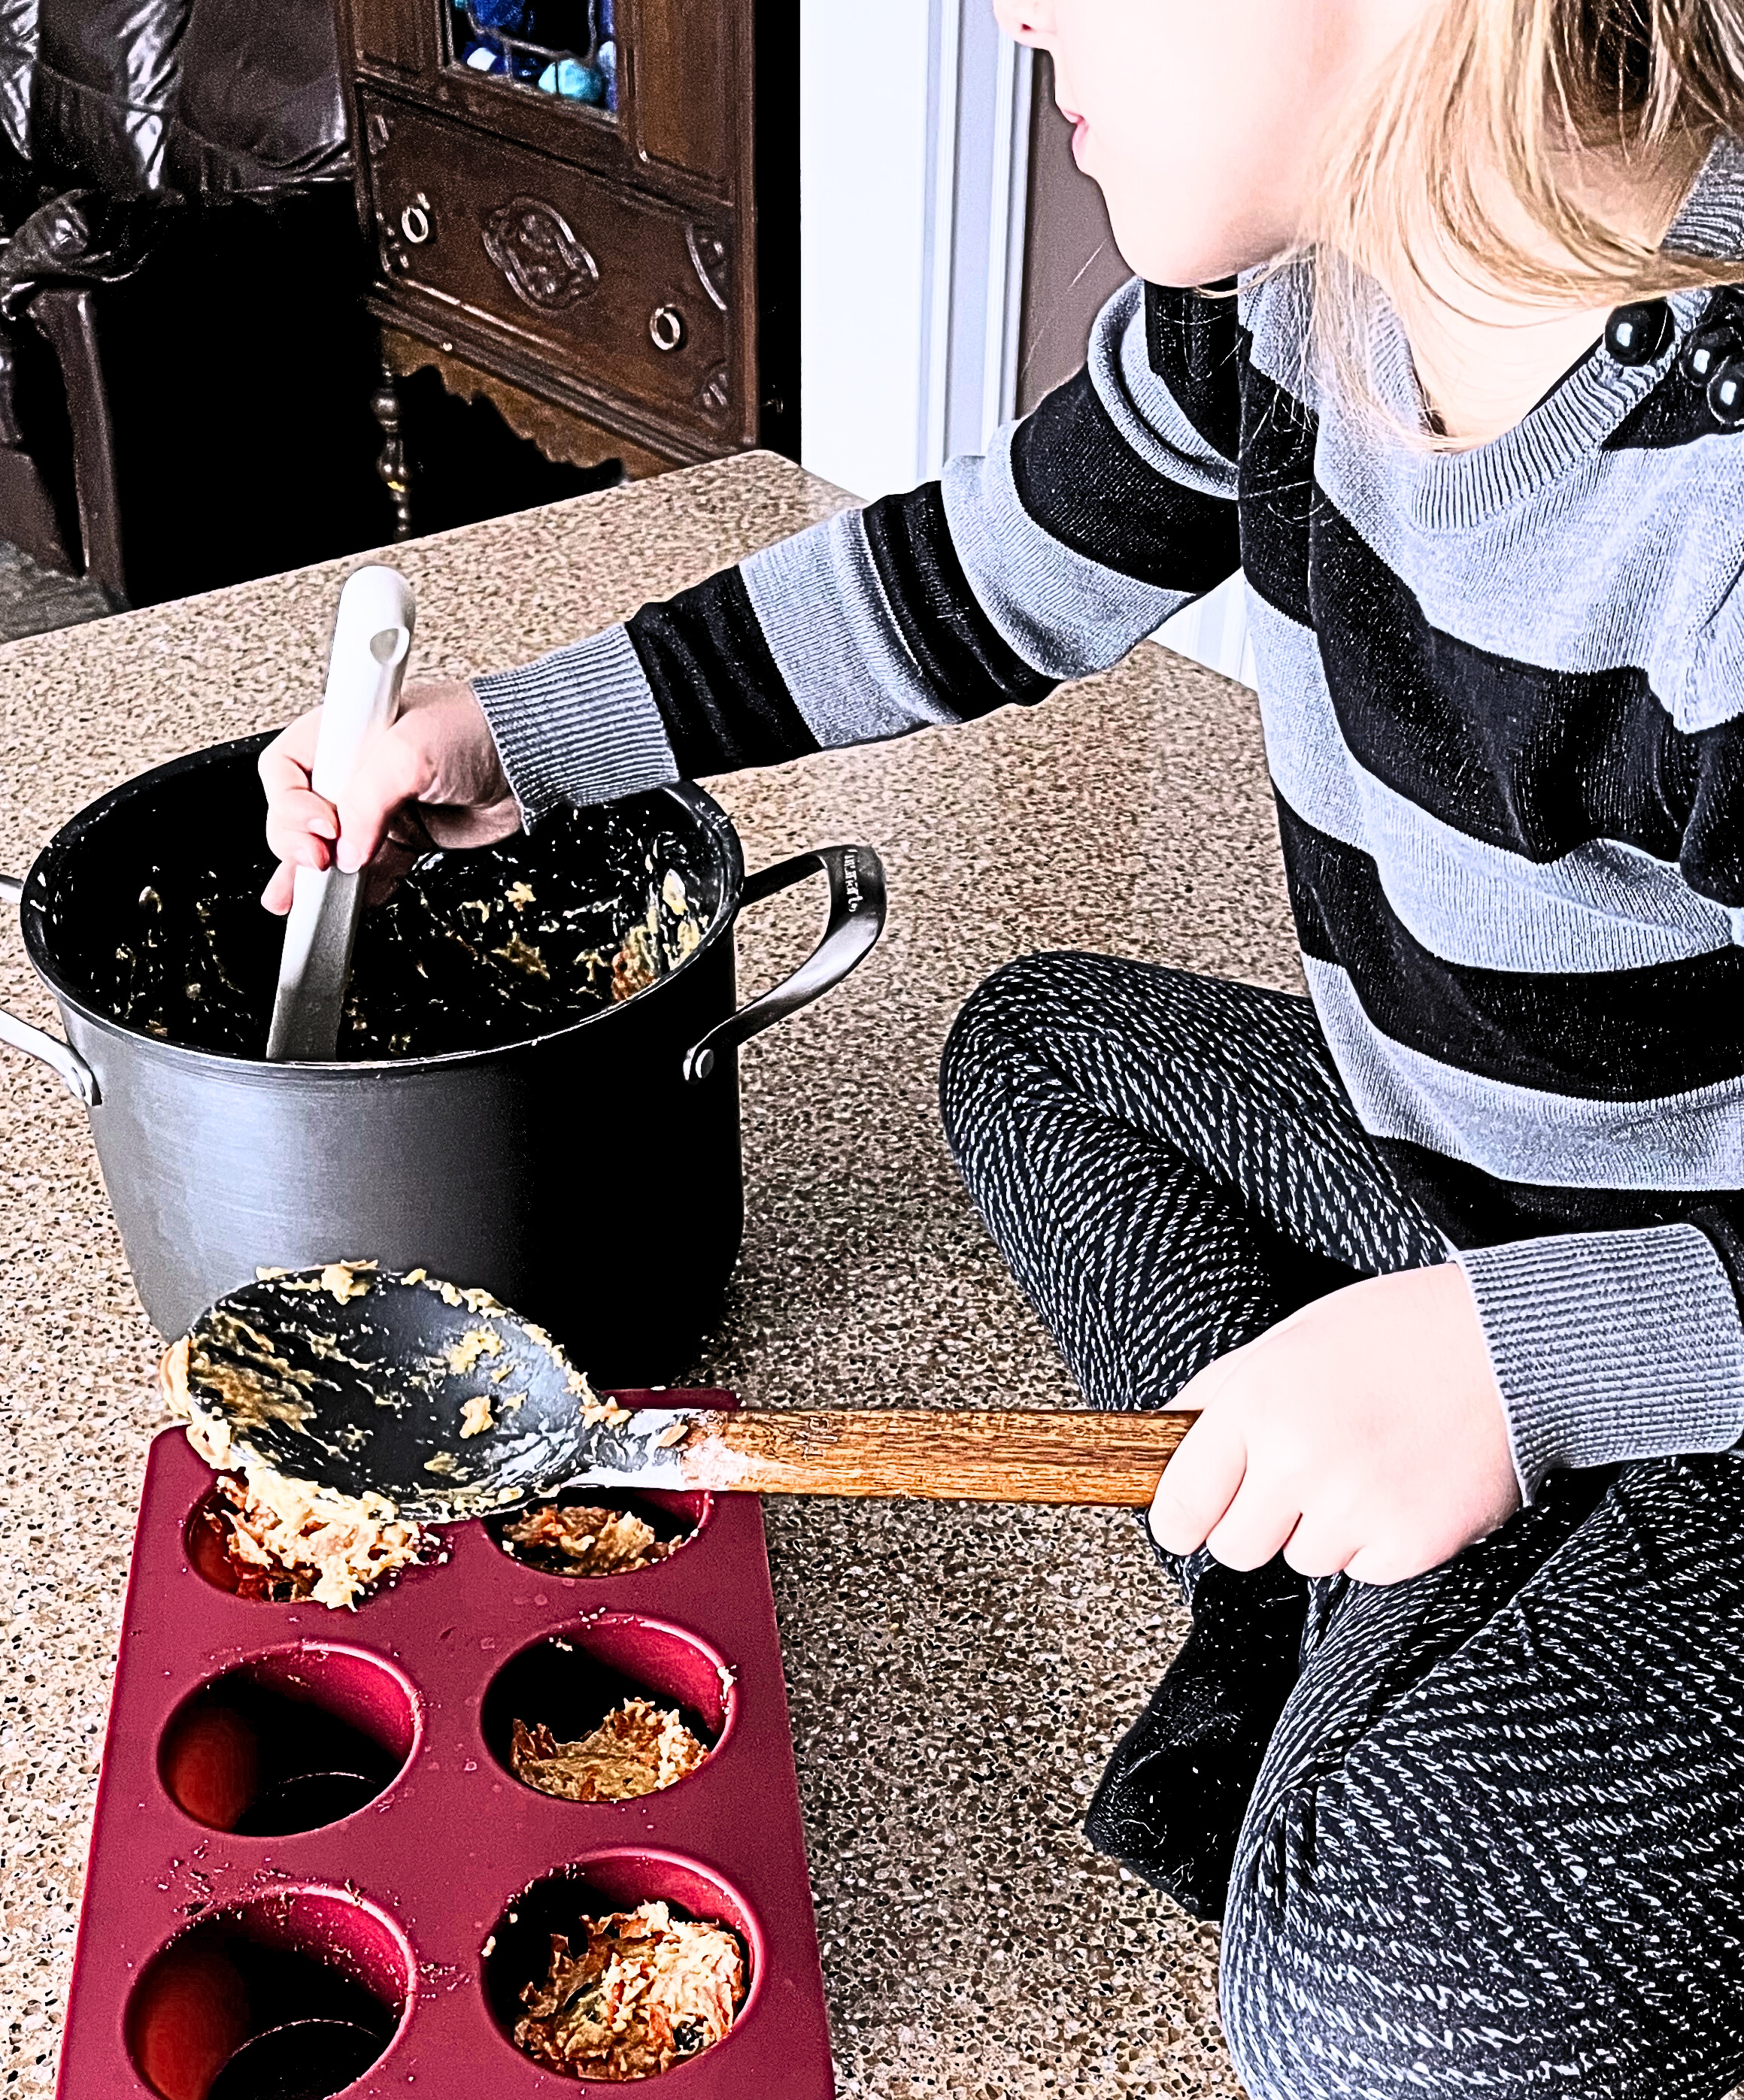 A little girl scooping muffin batter into a muffin tray.